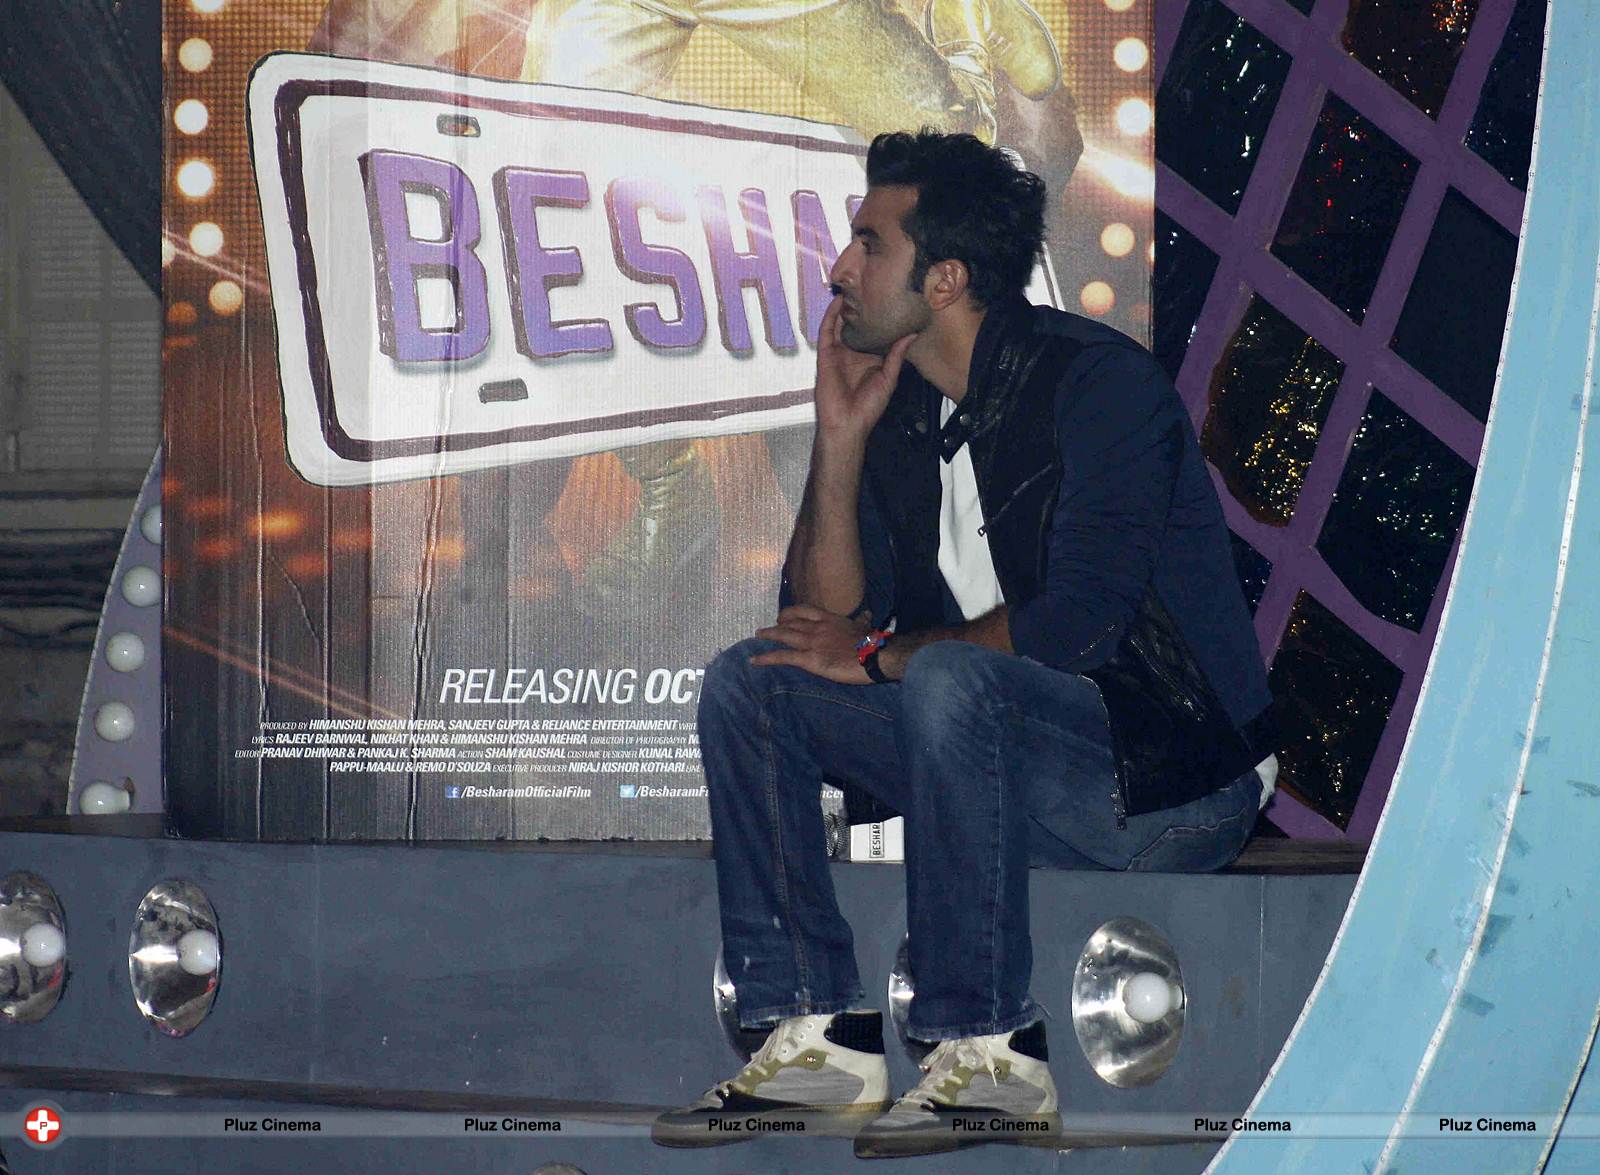 Ranbir Kapoor - Launch of song Aare Aare from film Besharam Photos | Picture 565331